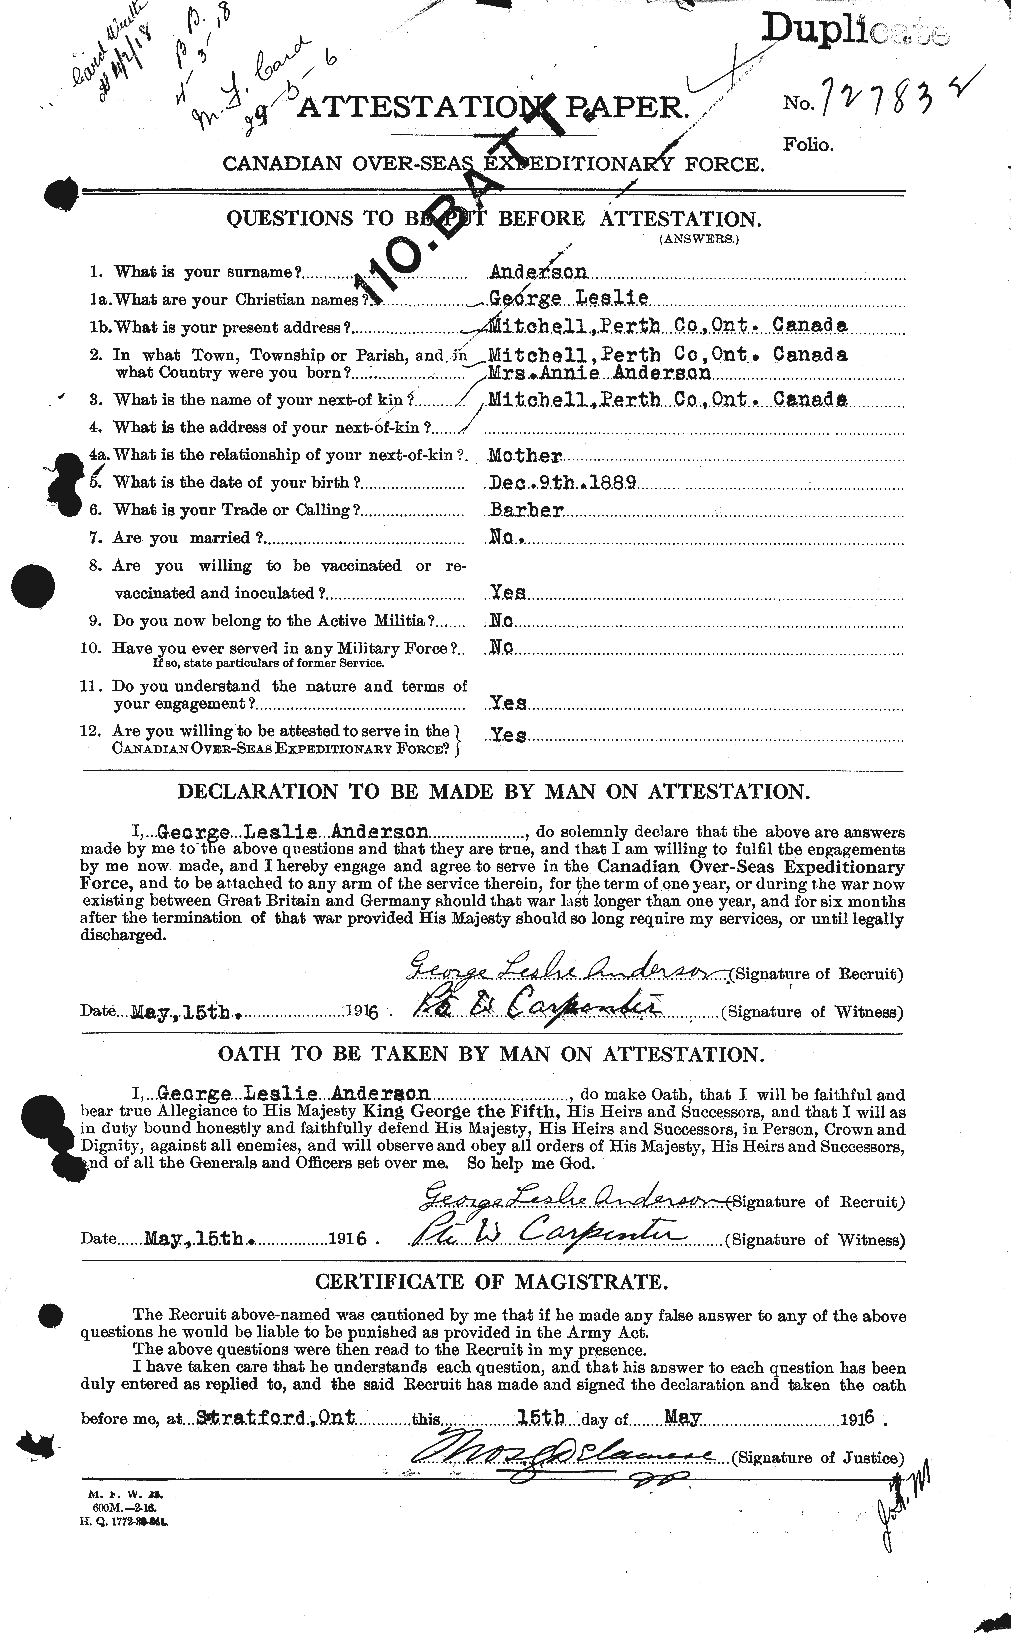 Personnel Records of the First World War - CEF 209714a